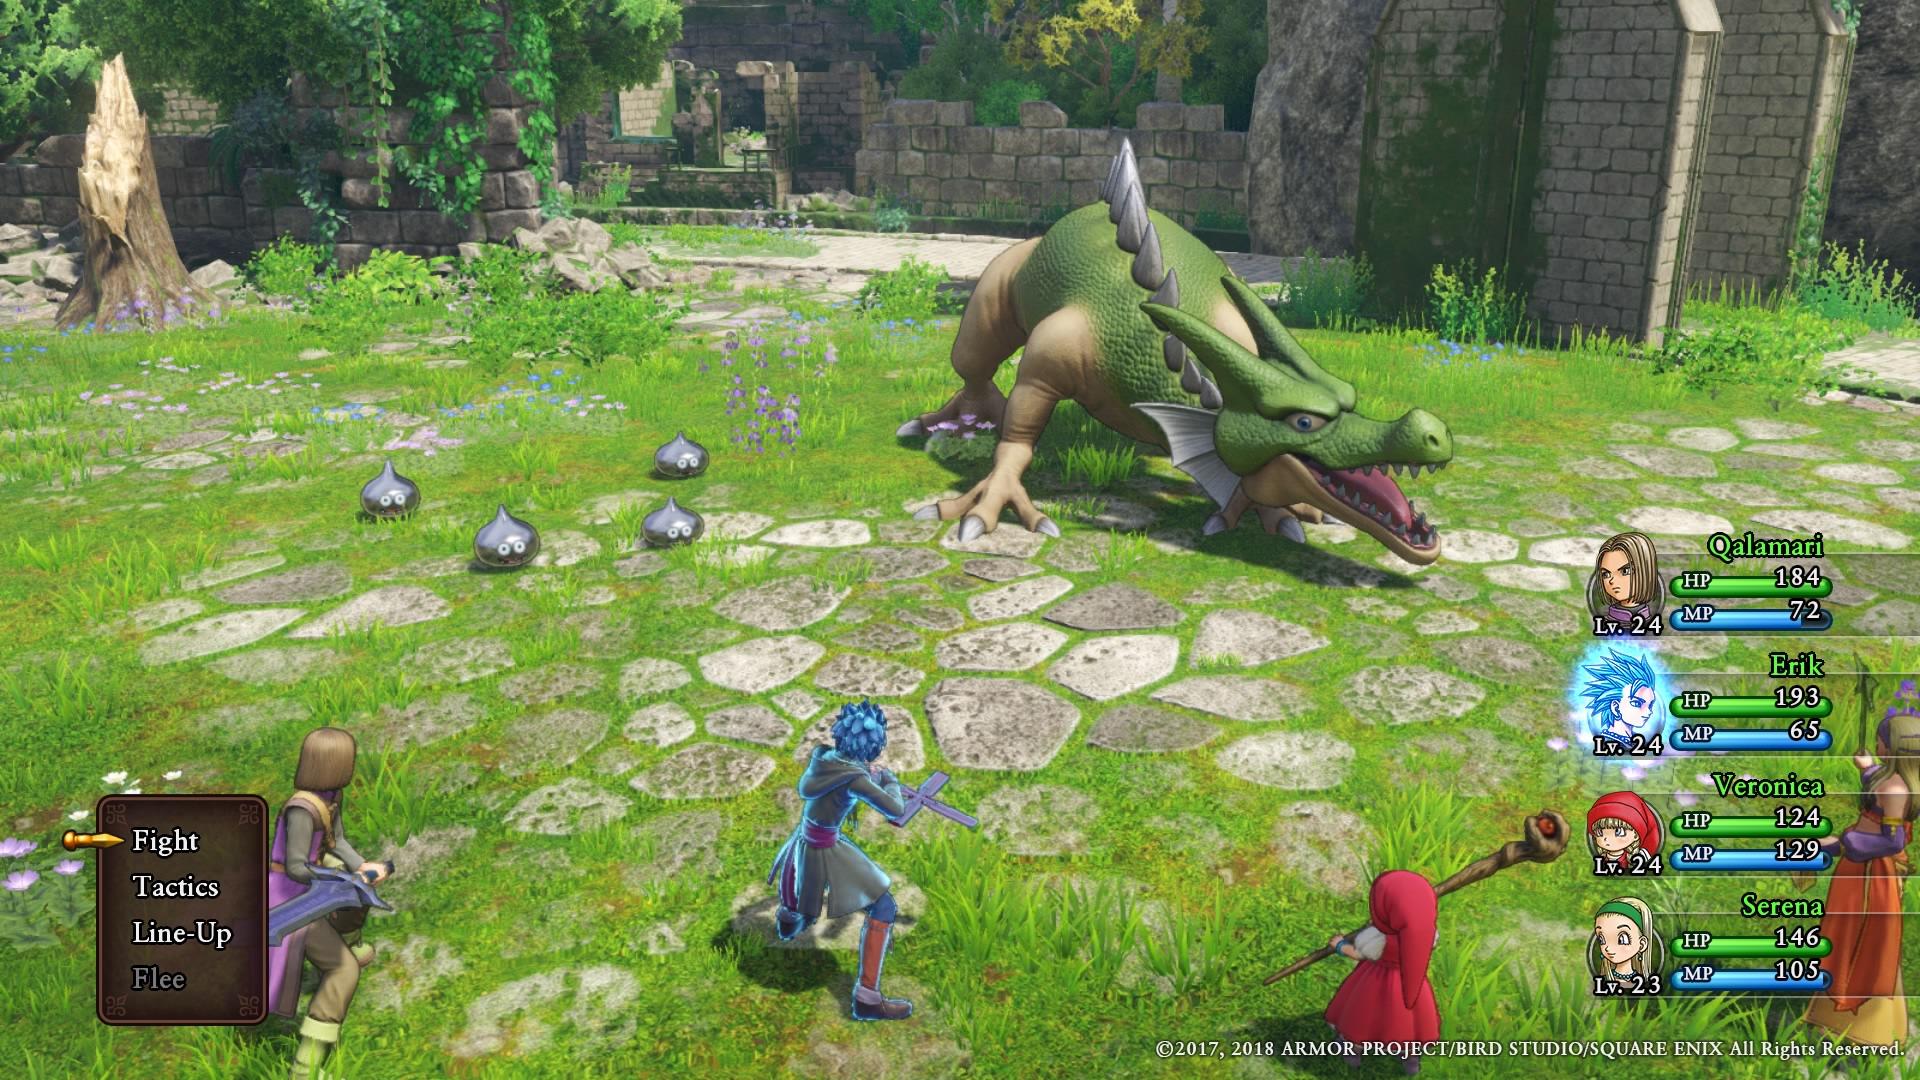 Review: Dragon Quest XI: Echoes of an Elusive Age is